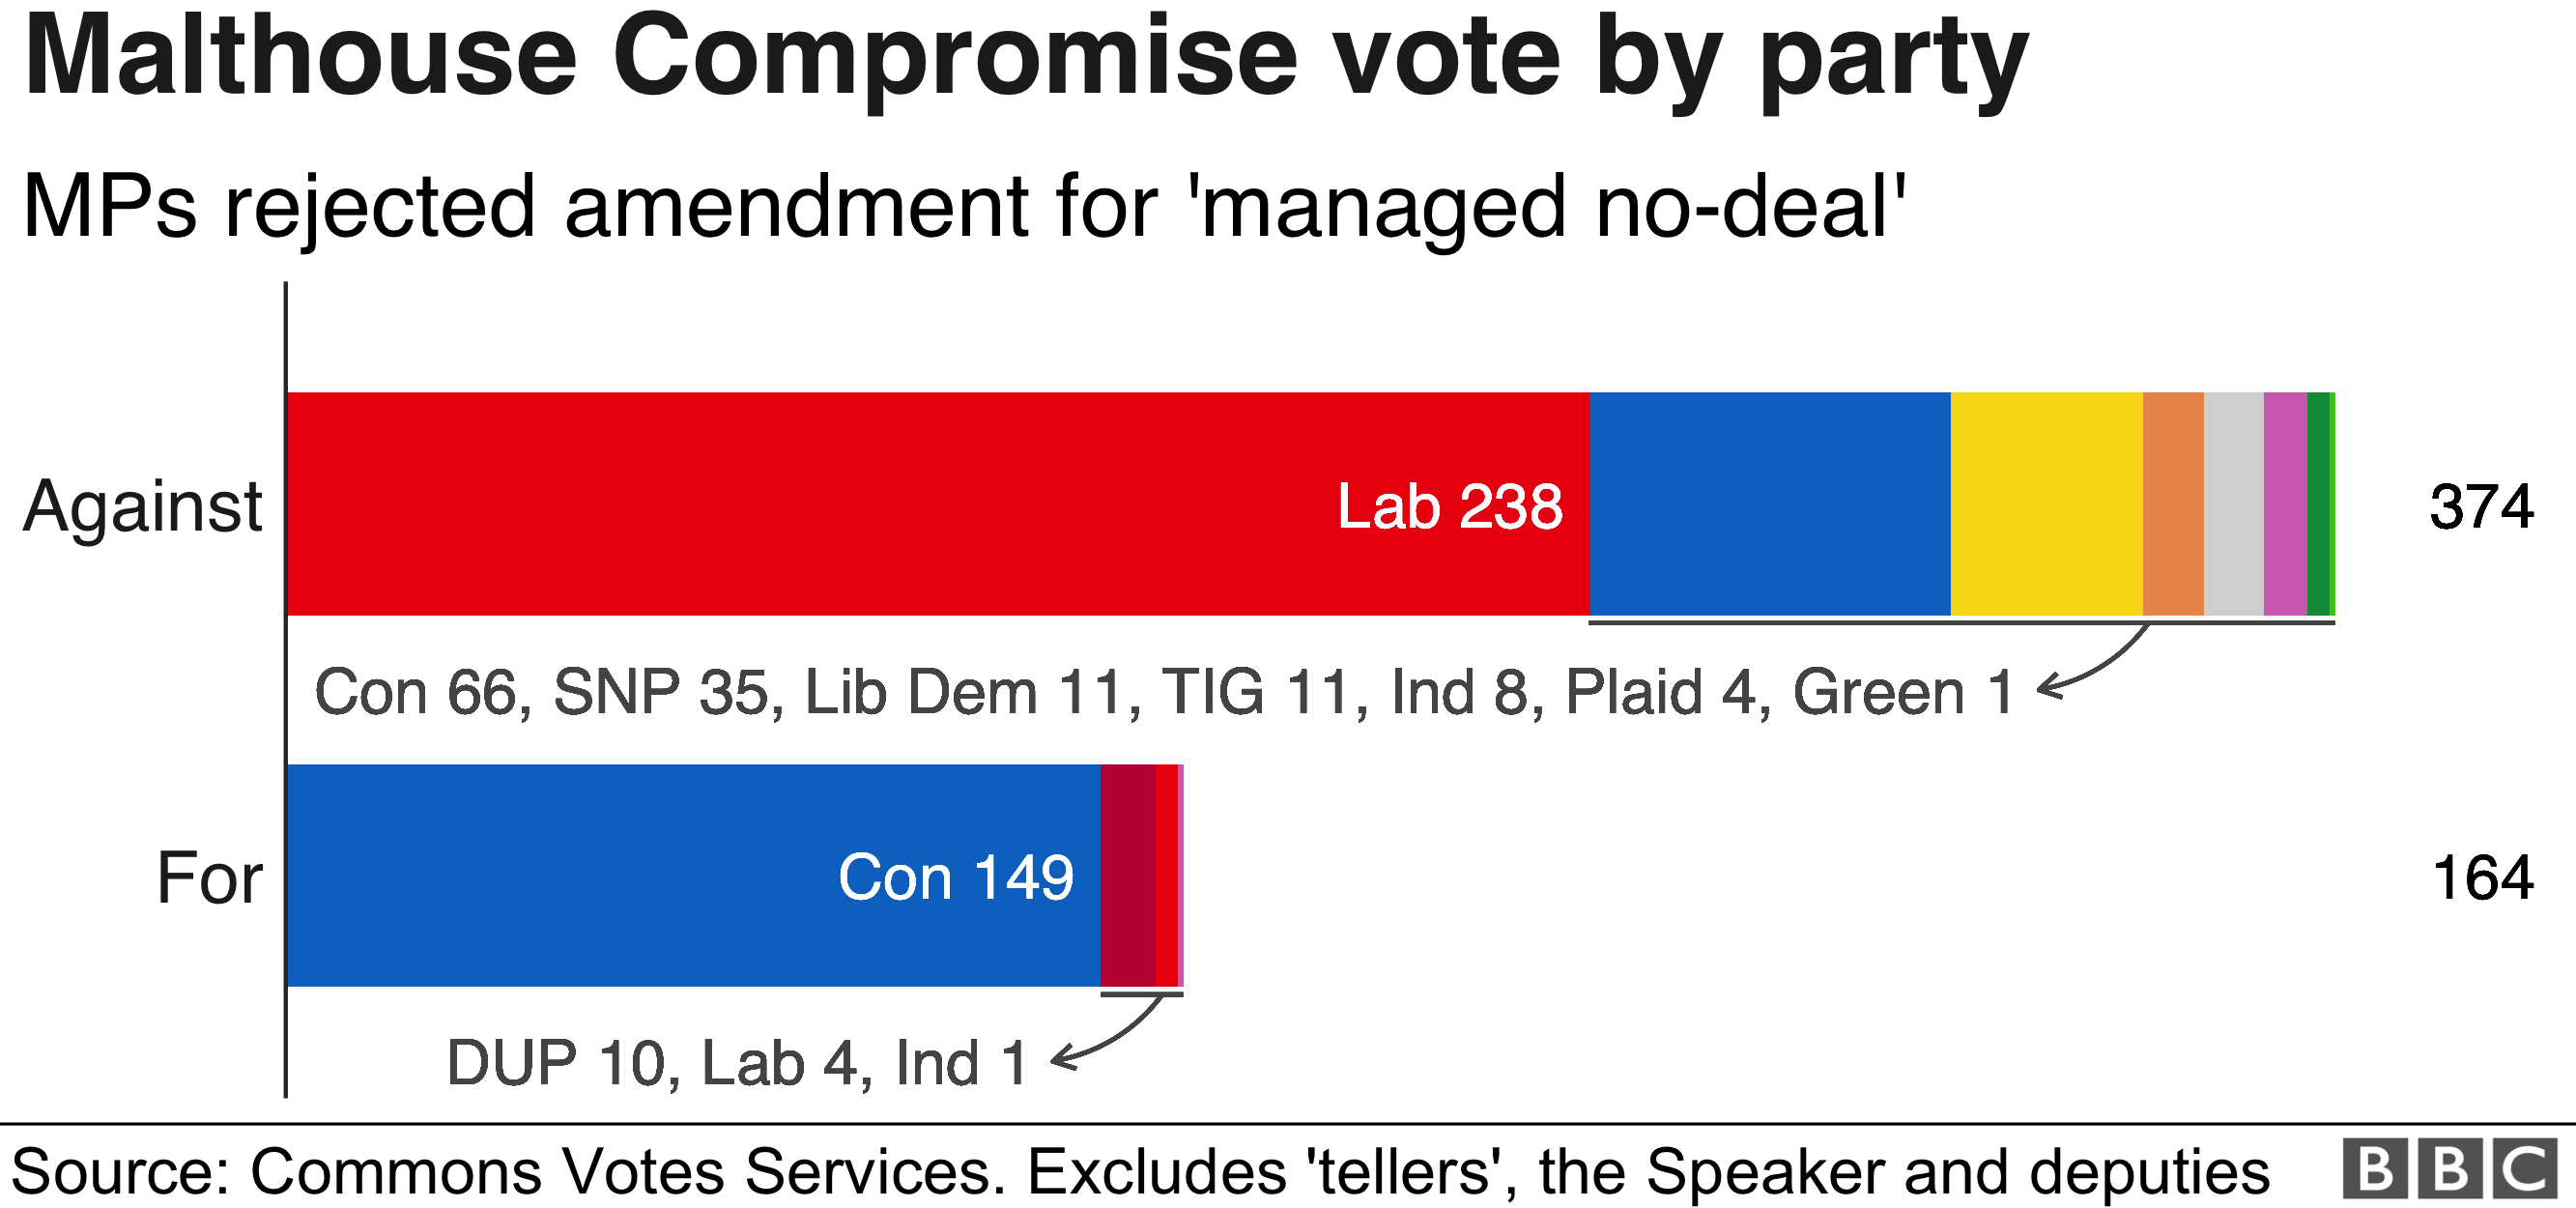 Chart showing breakdown of vote on Malthouse amendment